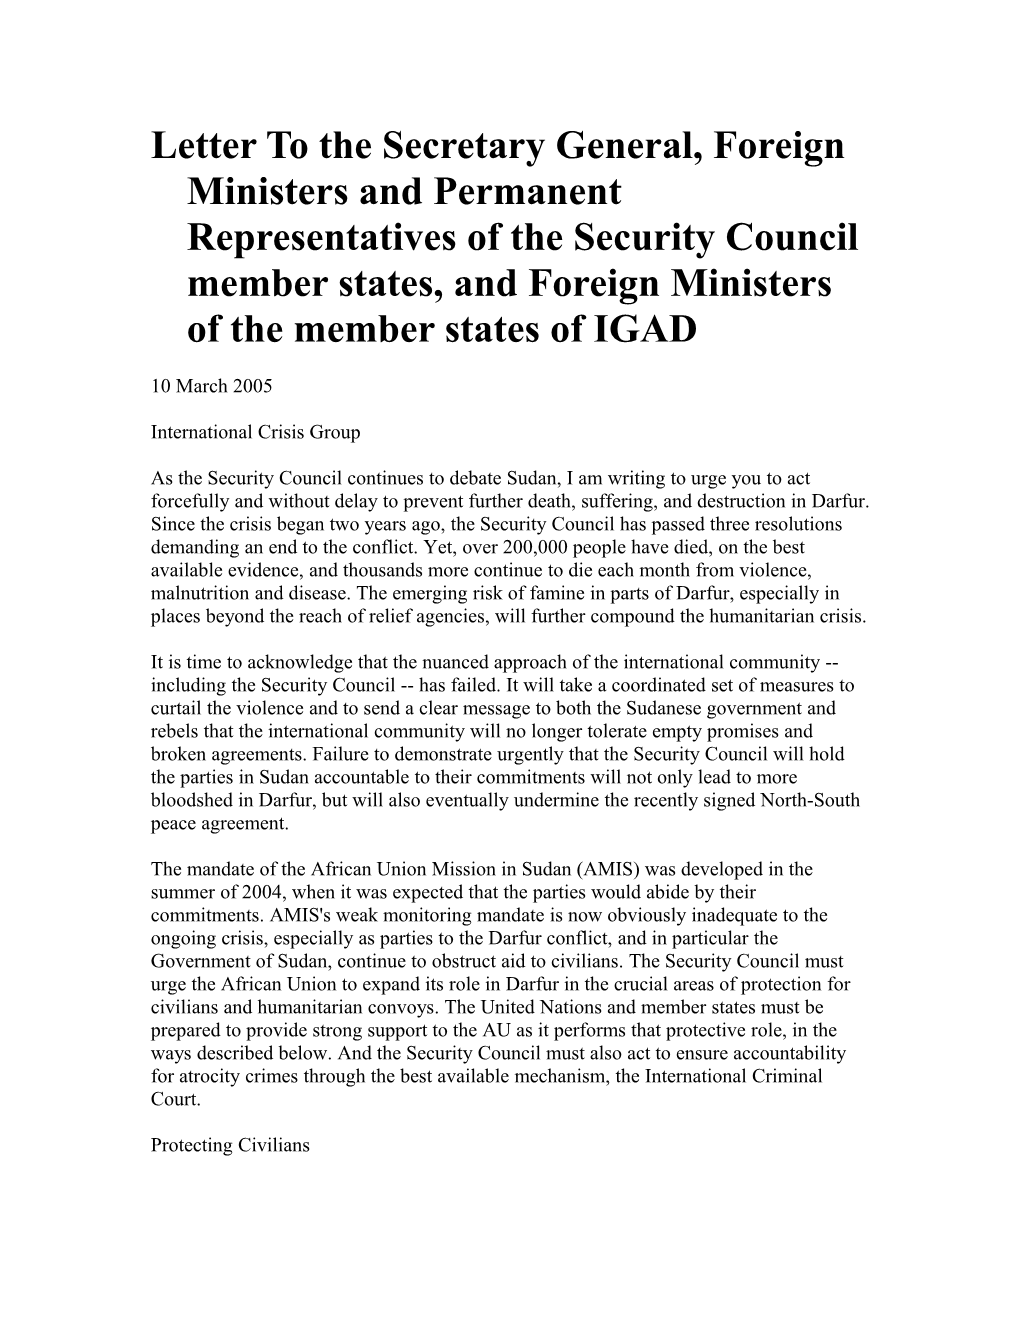 Letter to the Secretary General, Foreign Ministers and Permanent Representatives of The